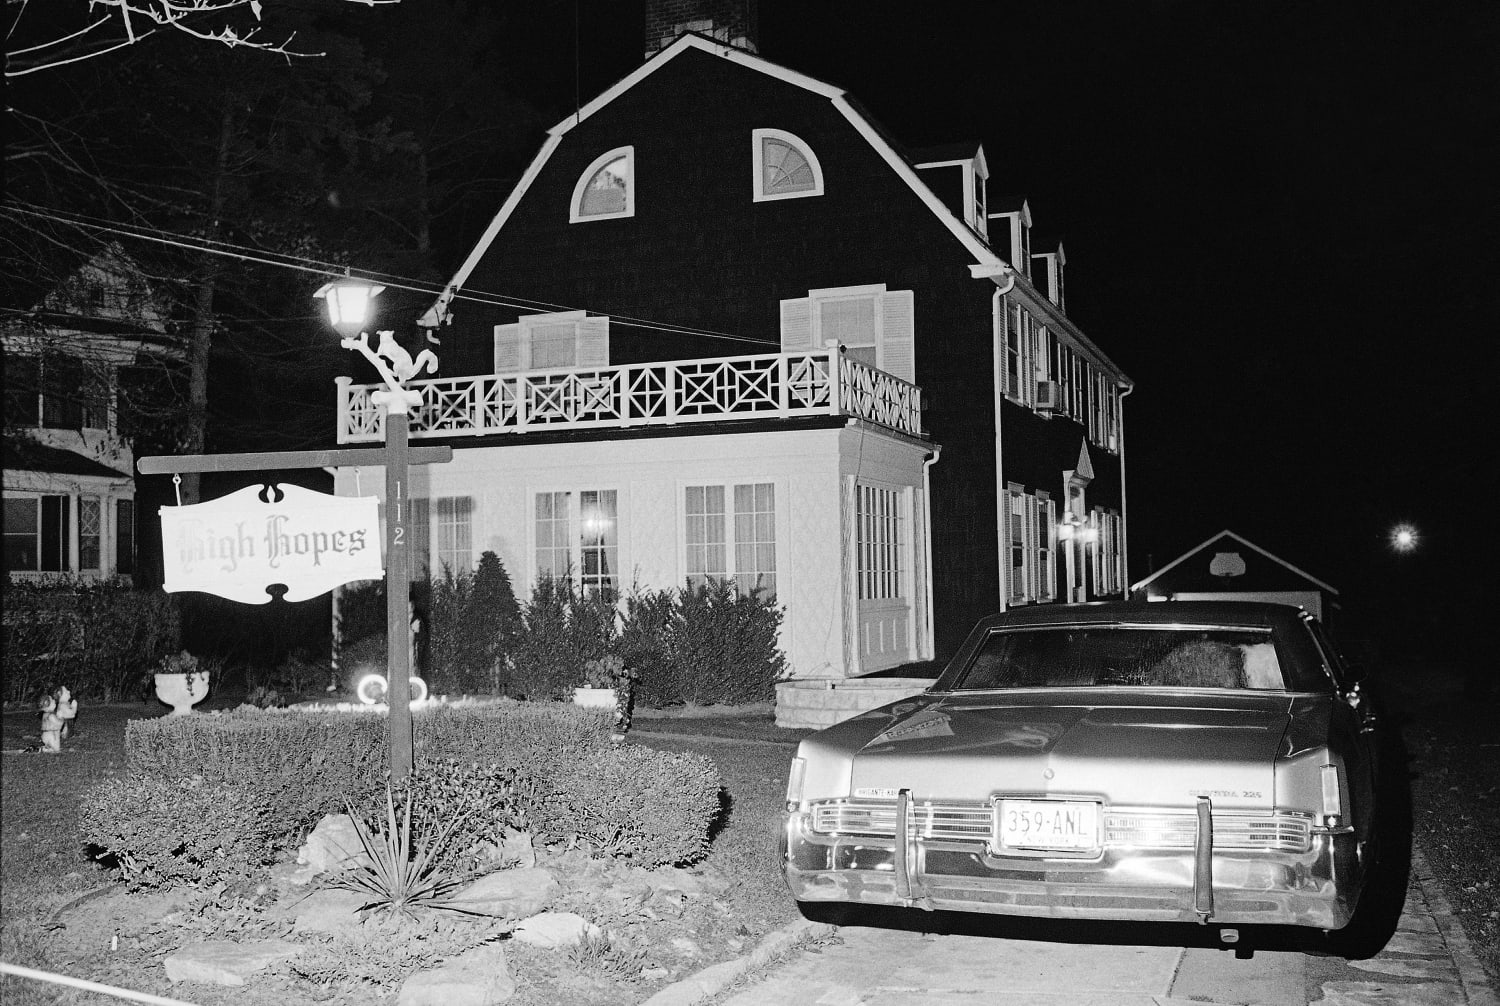 Amityville Horror' House on Sale for $850,000